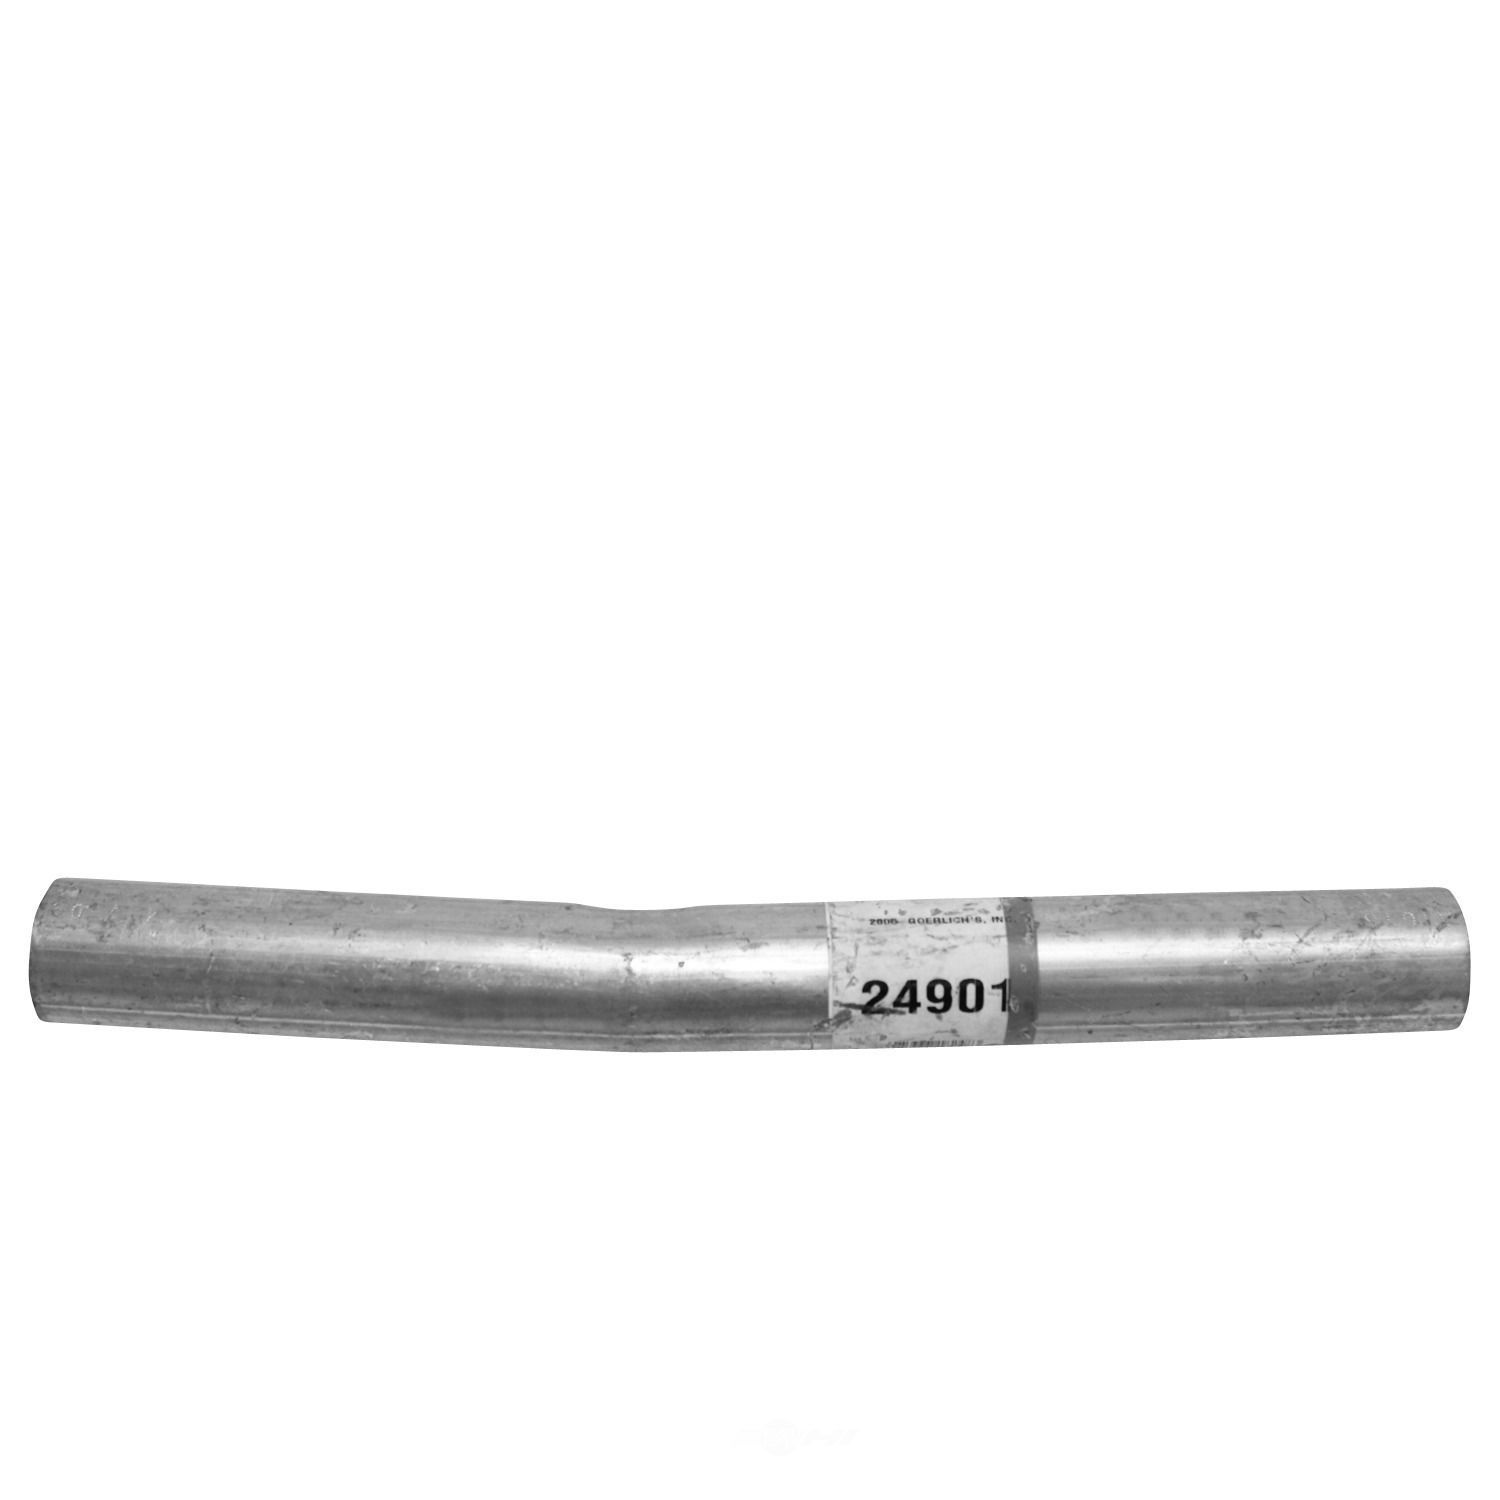 AP EXHAUST W/FEDERAL CONVERTER - Exhaust Tail Pipe - APF 24901